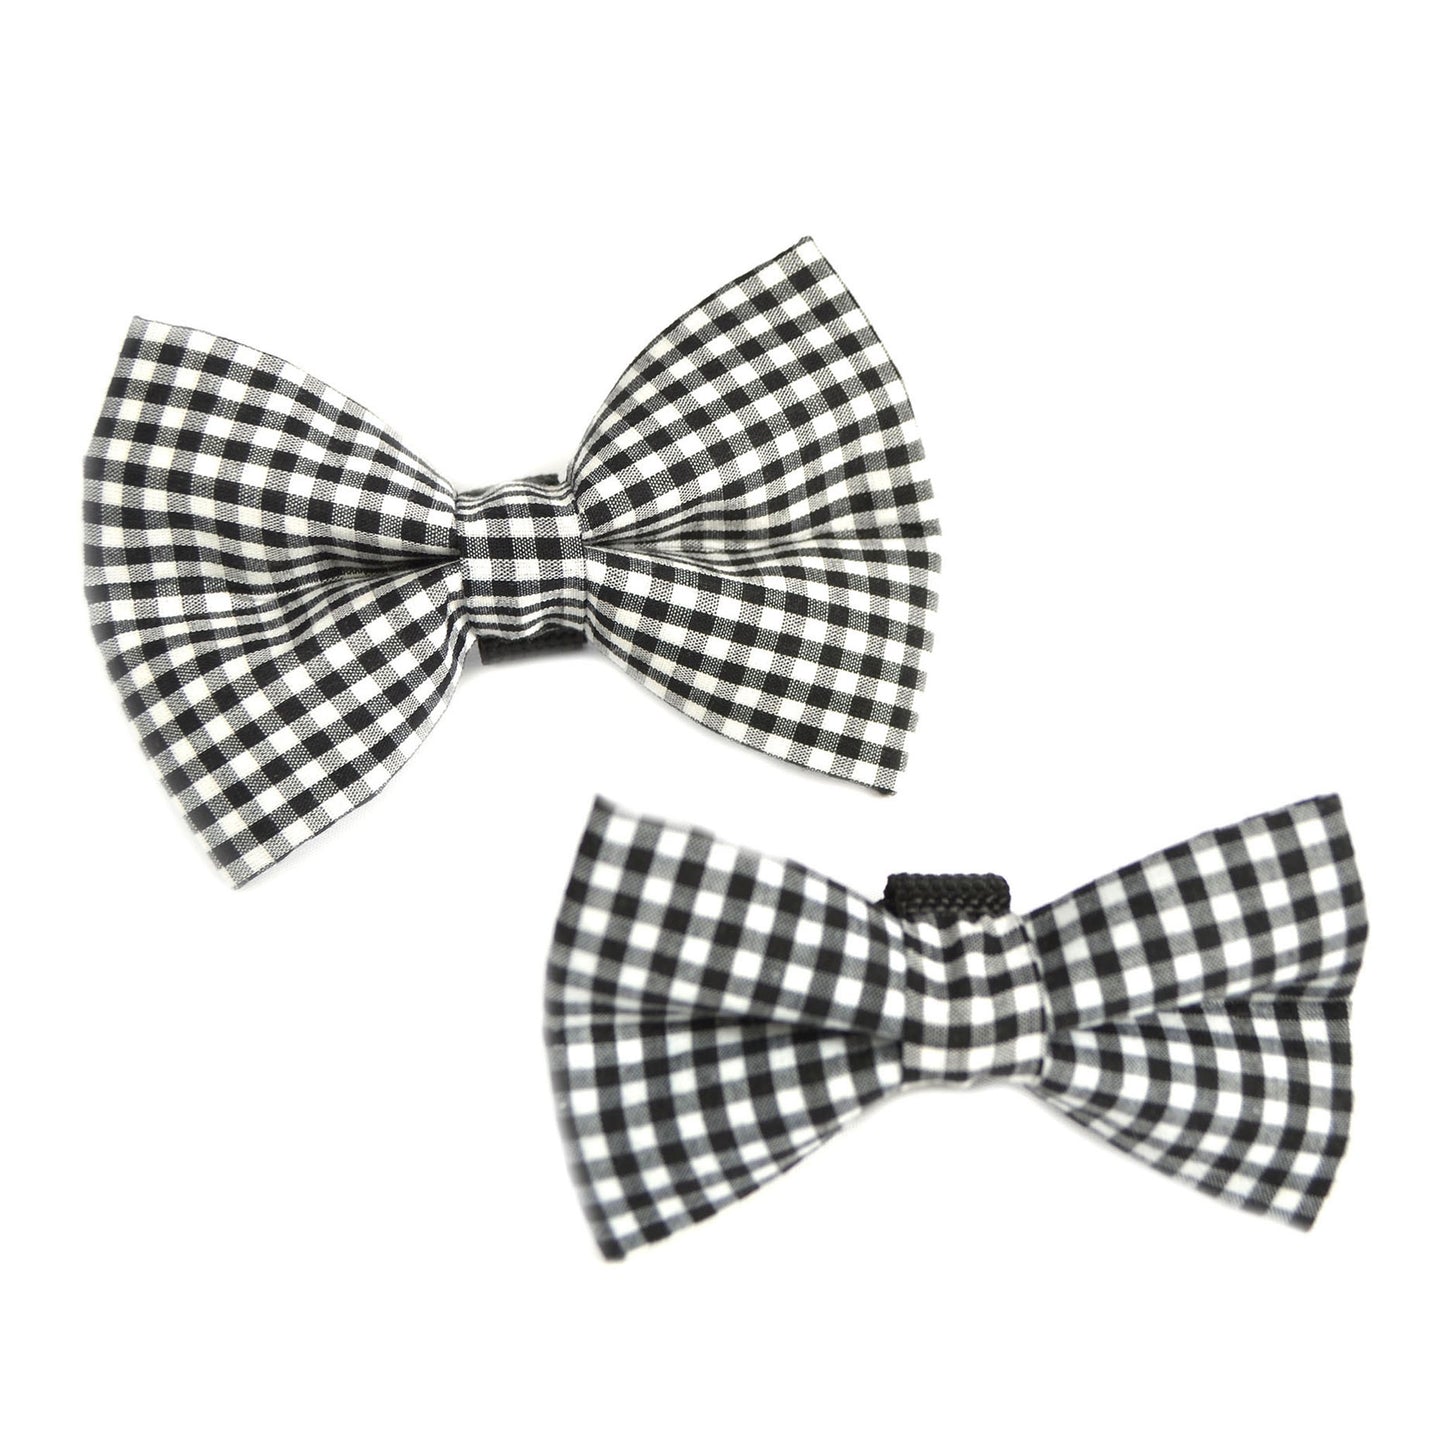 Black and White Gingham Dog Bow Tie